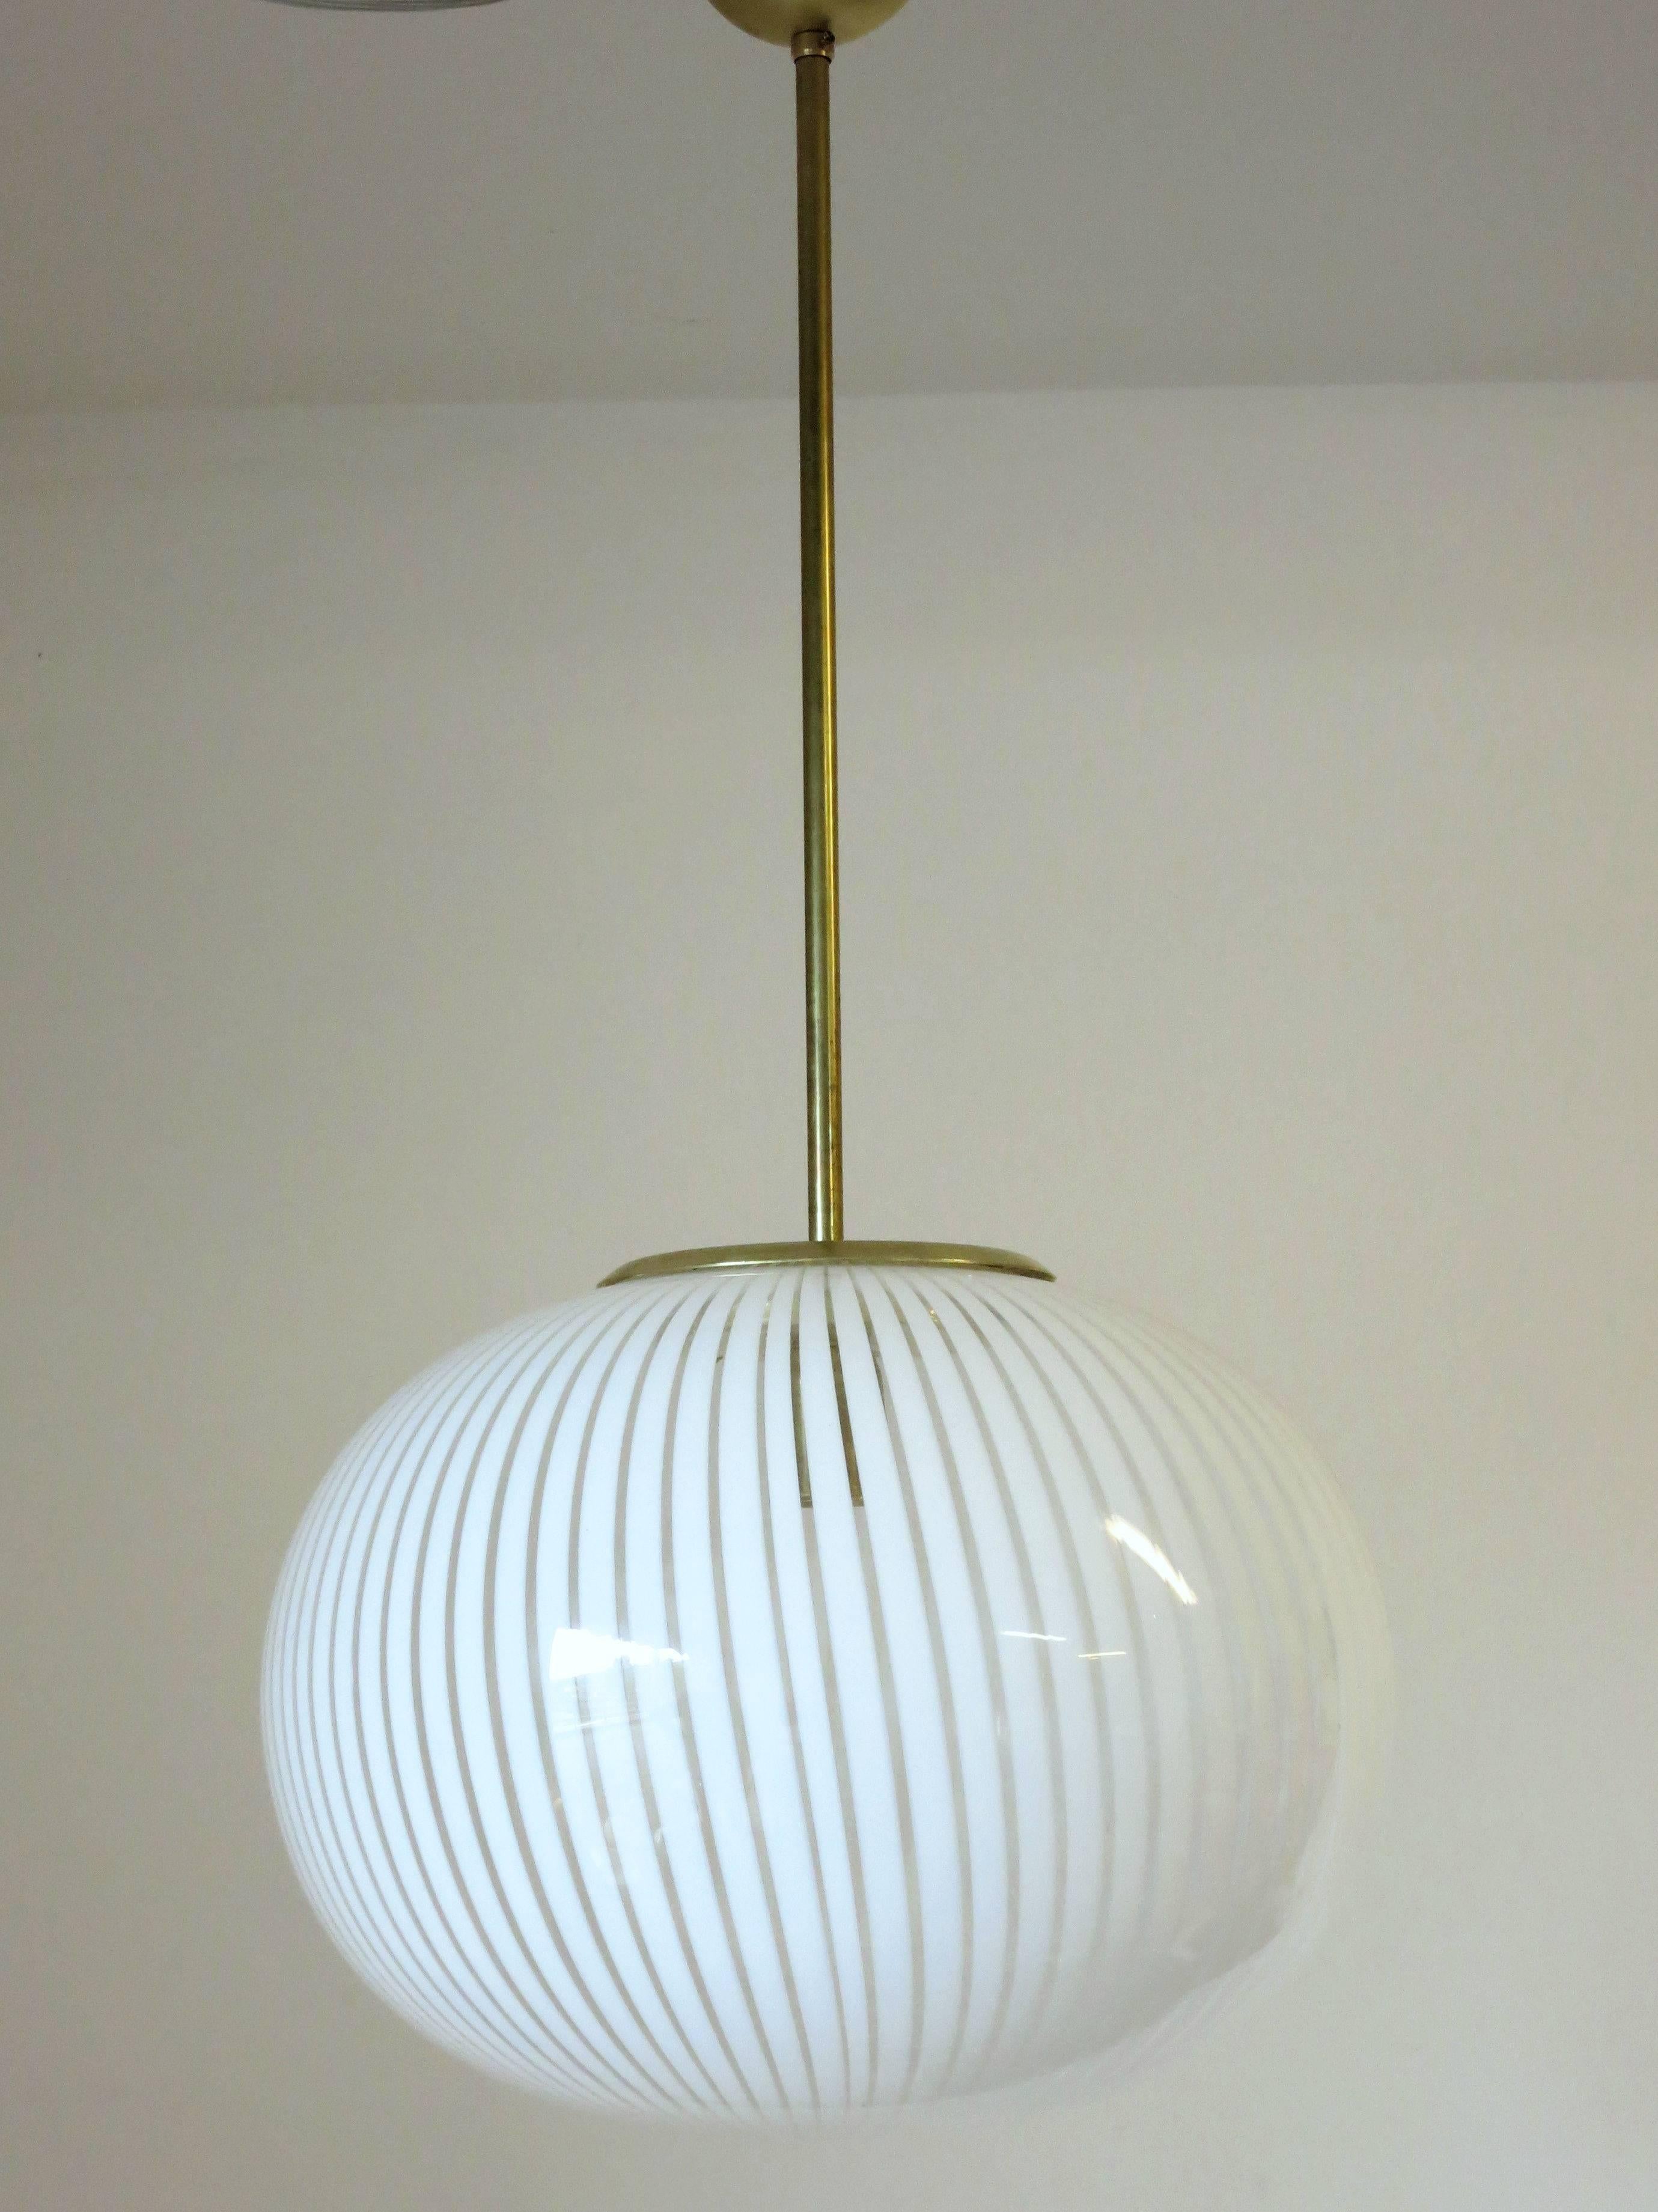 Italian Murano glass with white stripes pendant by Venini.
Single light socket ; wired for the U.S.